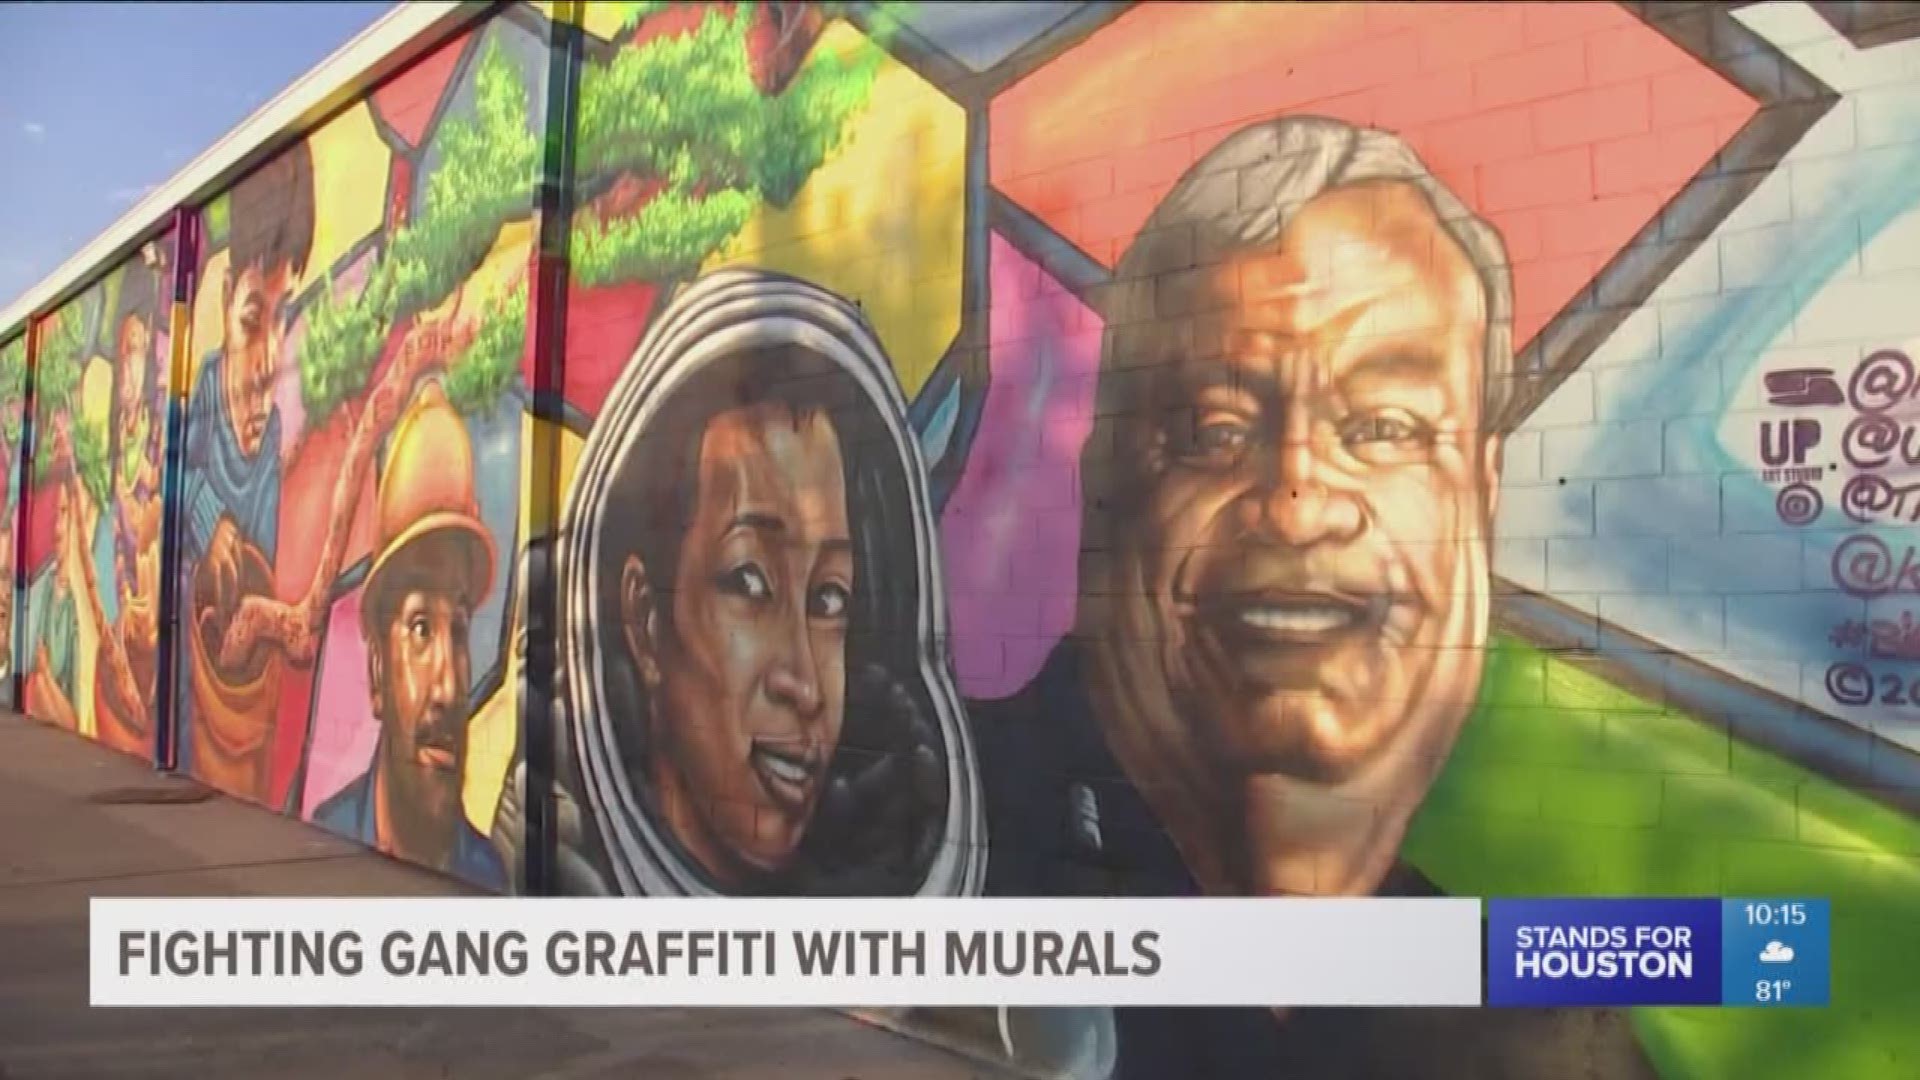 Business owners hope murals stop gang members from tagging their buildings. 